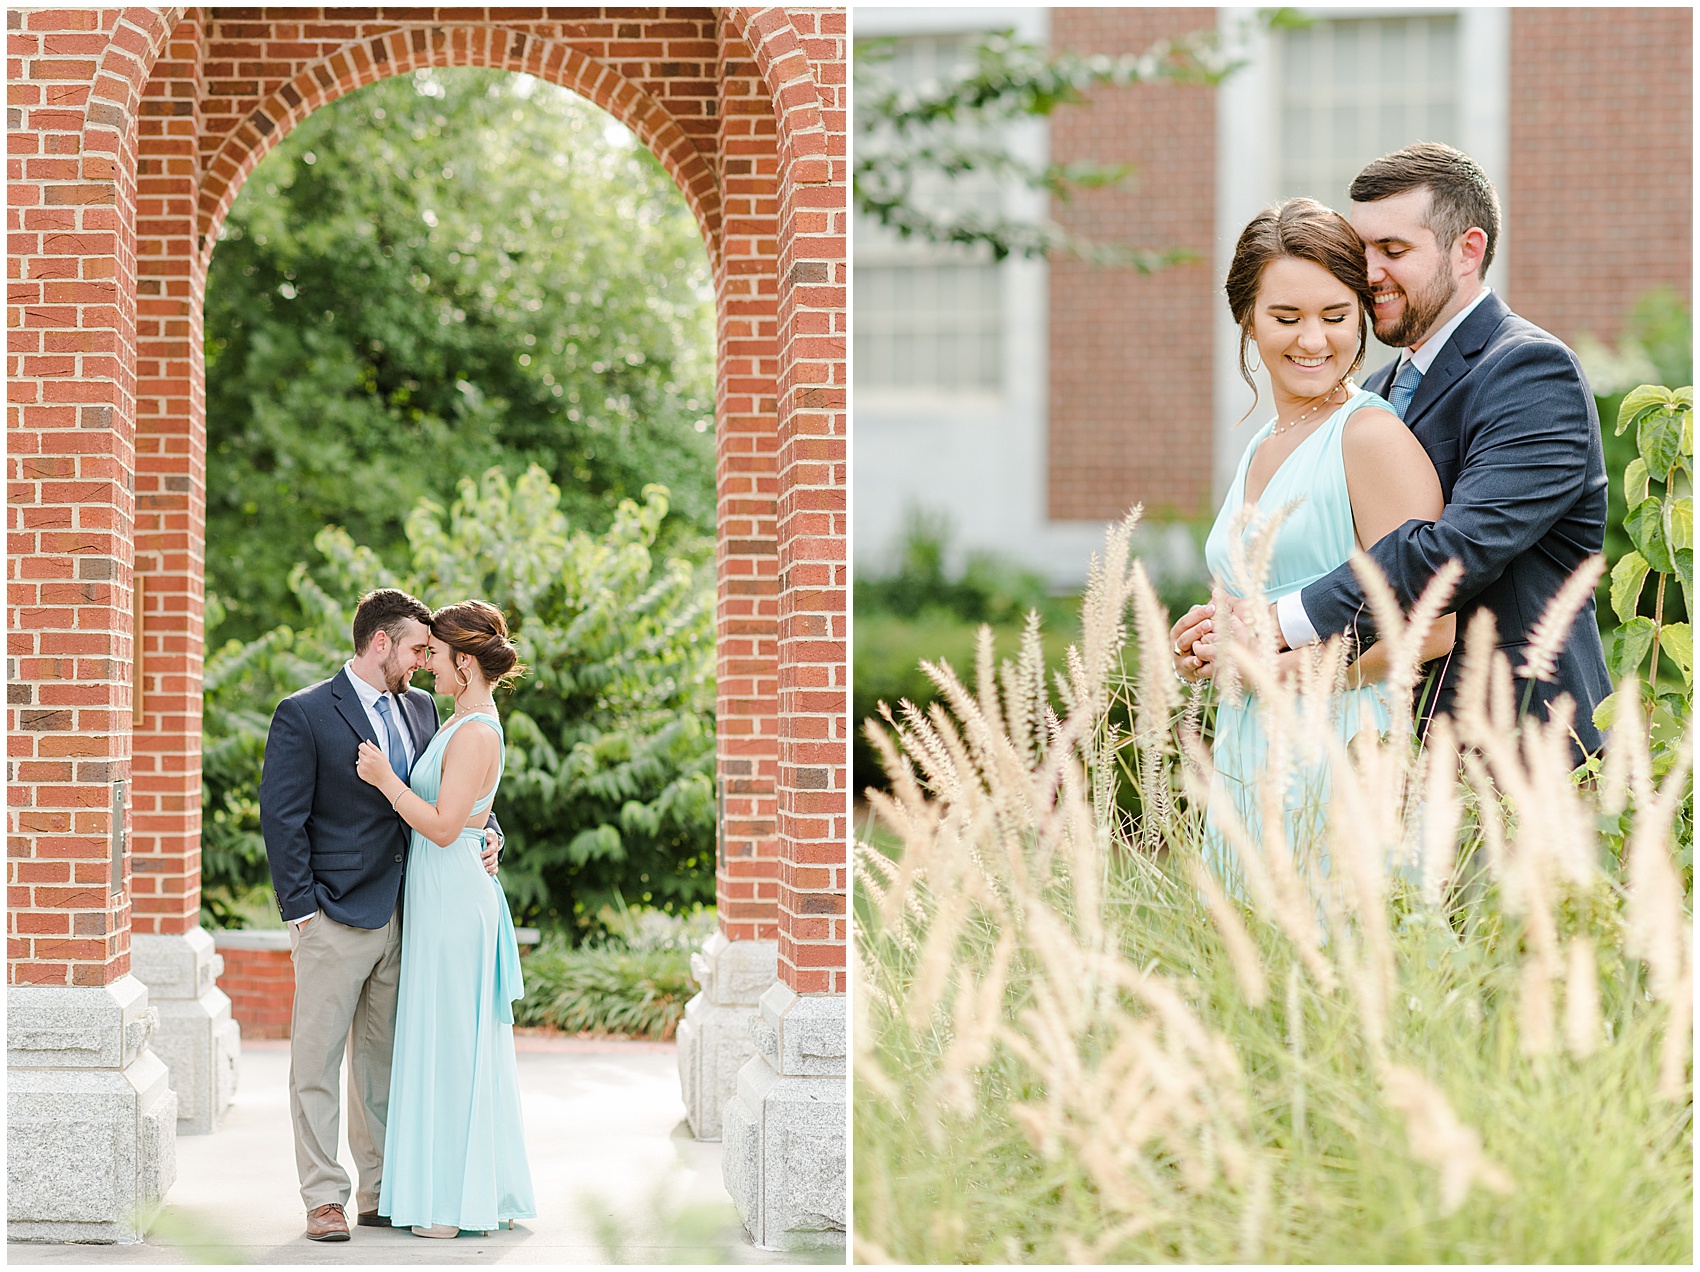 UNCG engagement session Raleigh NC wedding photographer Charleston SC wedding Photographer_0414.jpg